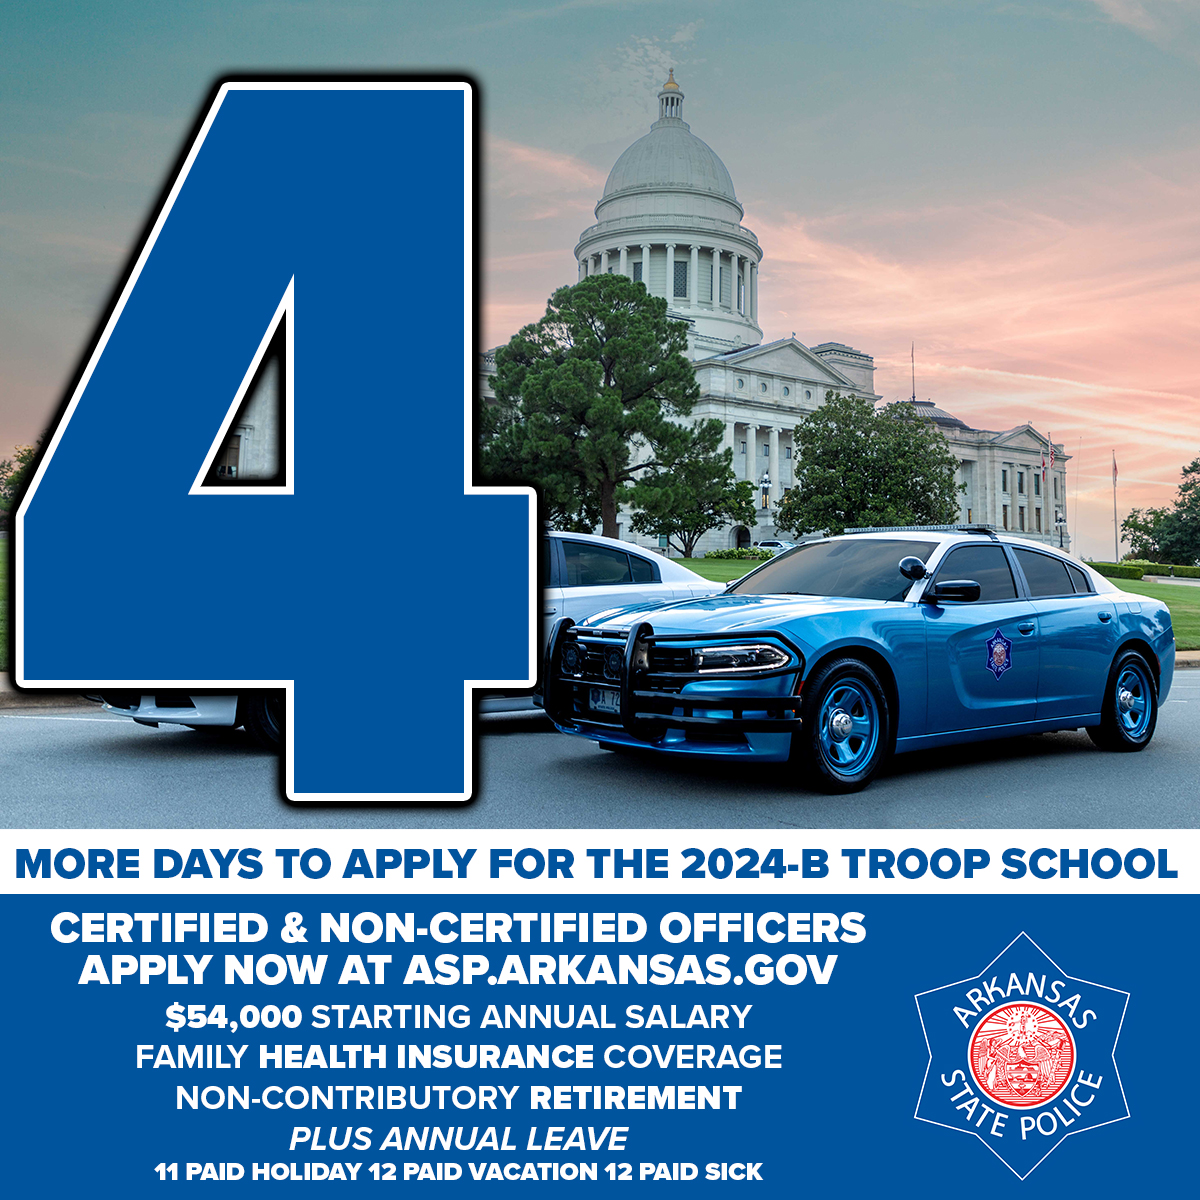 There's ONLY 4 MORE DAYS left to apply for Troop School 2024-B! The school, scheduled to begin in October, is open to CERTIFIED AND NON-CERTIFIED applicants. Visit: bit.ly/ASPTroopSchool… for details on the application process. APPLICATION DEADLINE: 04/30/2024 – 11:59 p.m.